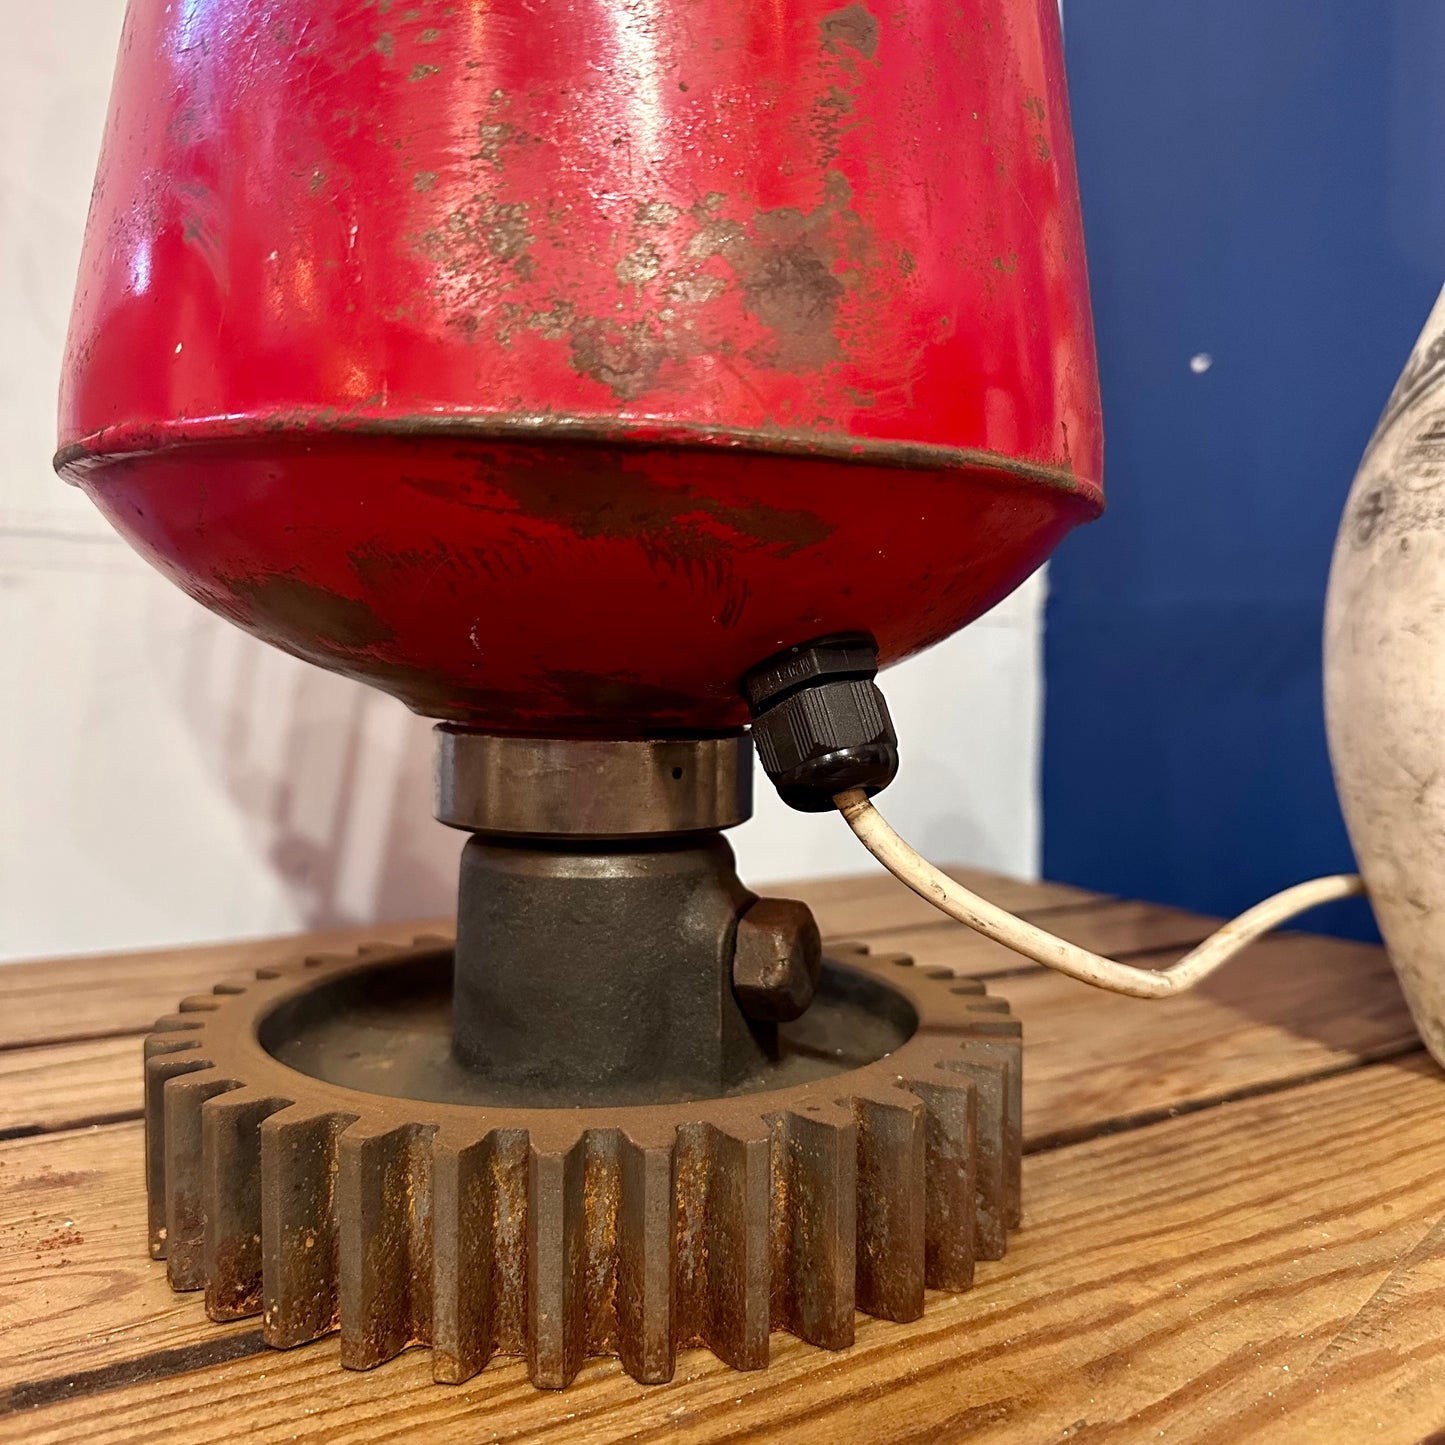 Upcycled Vintage Fire Extinguisher Lamp